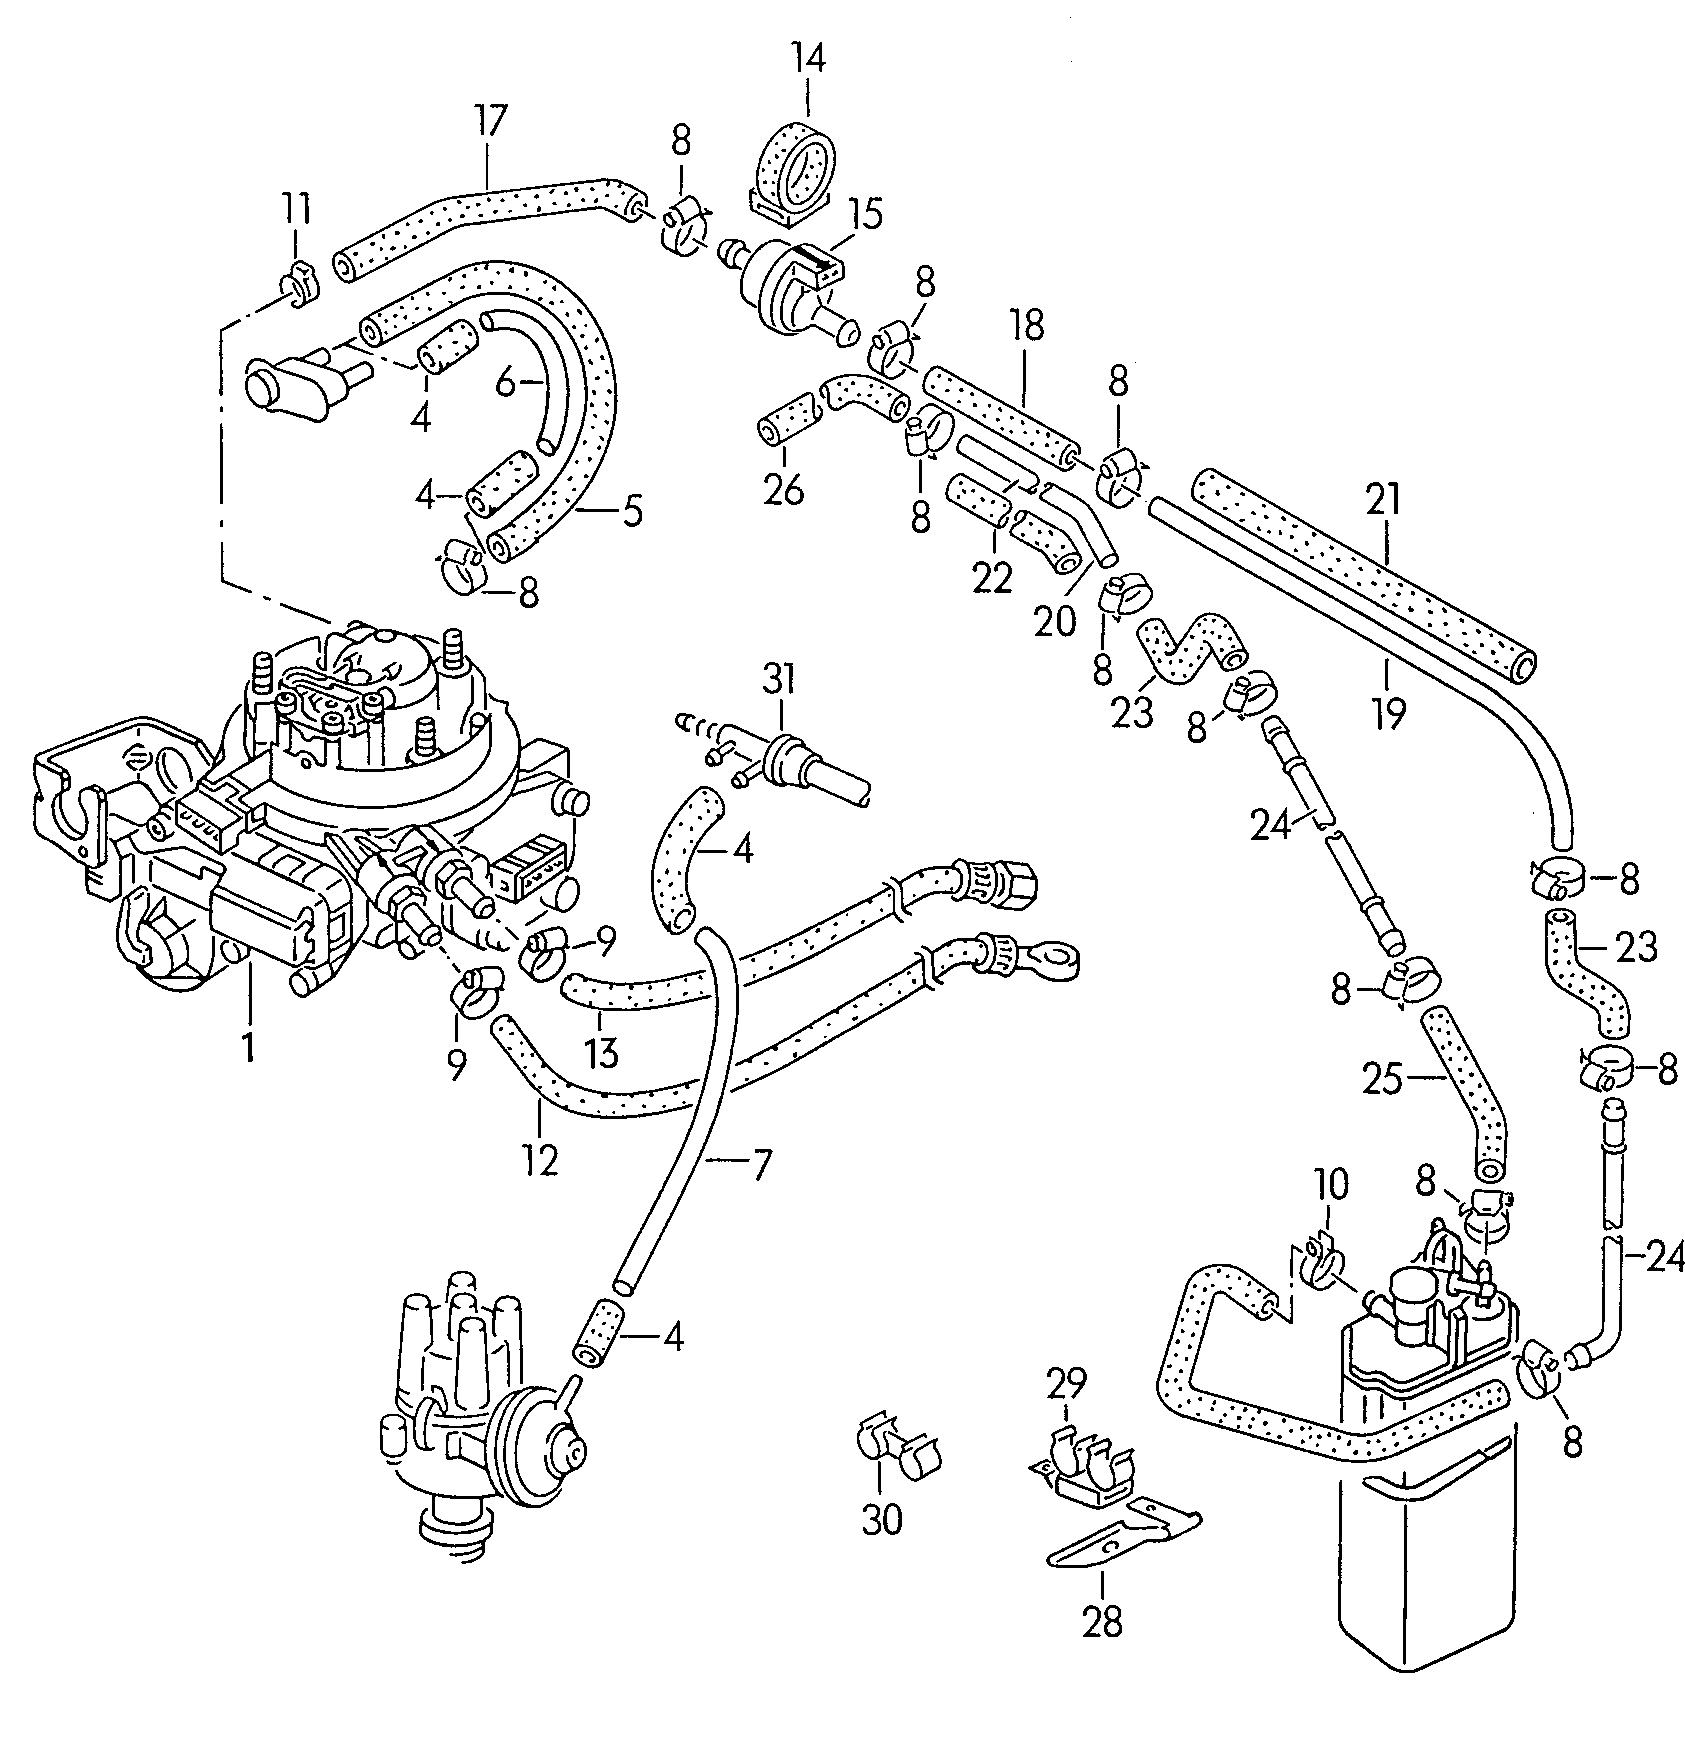 3799<br>25655<br>4392<br> F 8A-M-000 001>><br/> 5041 - Audi 80/90/Avant - a80